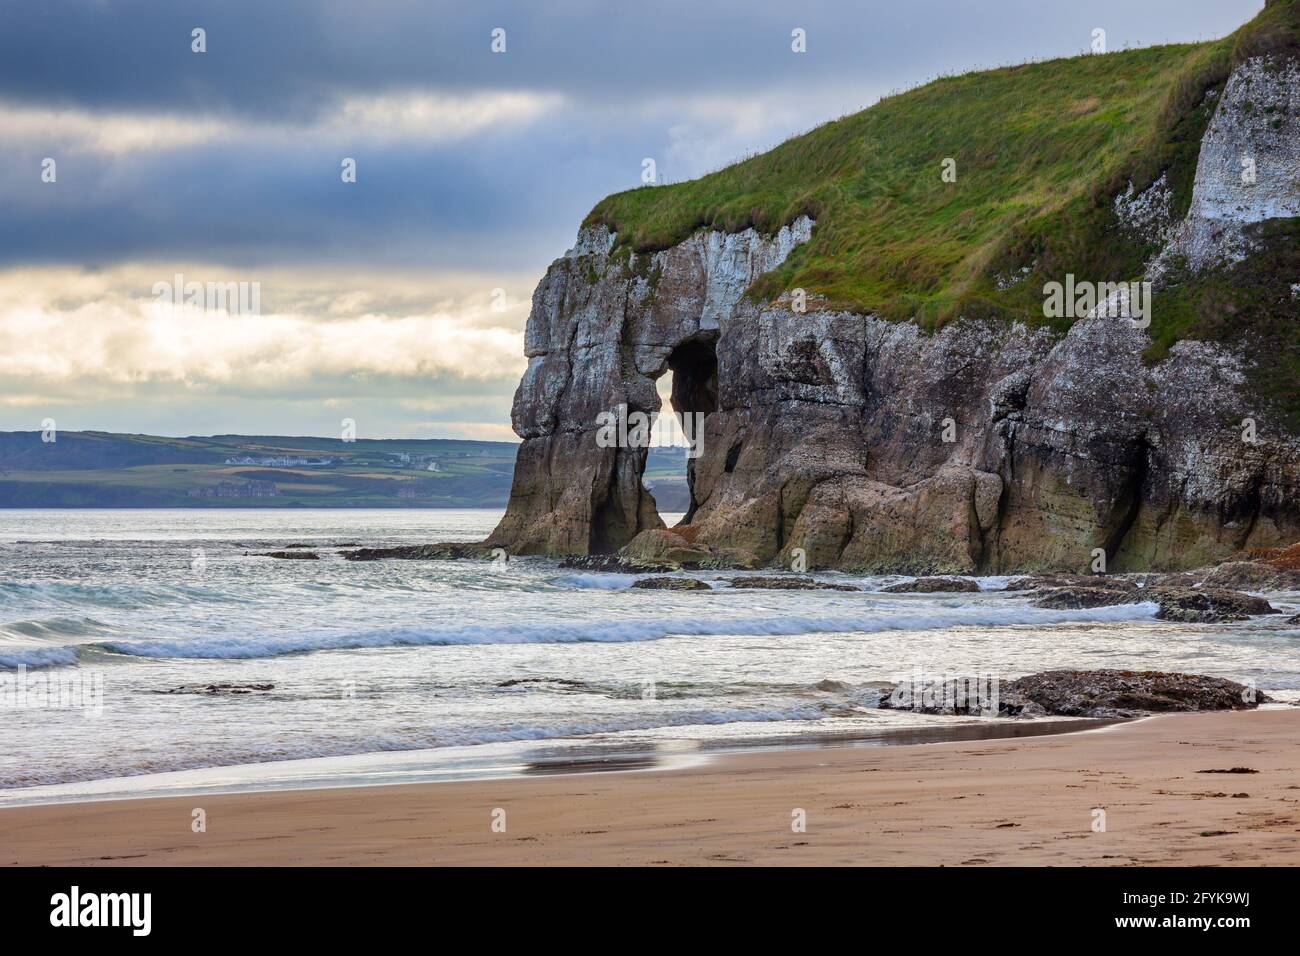 Rock Arch, known as the Elephant Rock at Whiterocks Beach, situated just off the Causeway Coastal Route on the north coast of Northern Ireland. Stock Photo